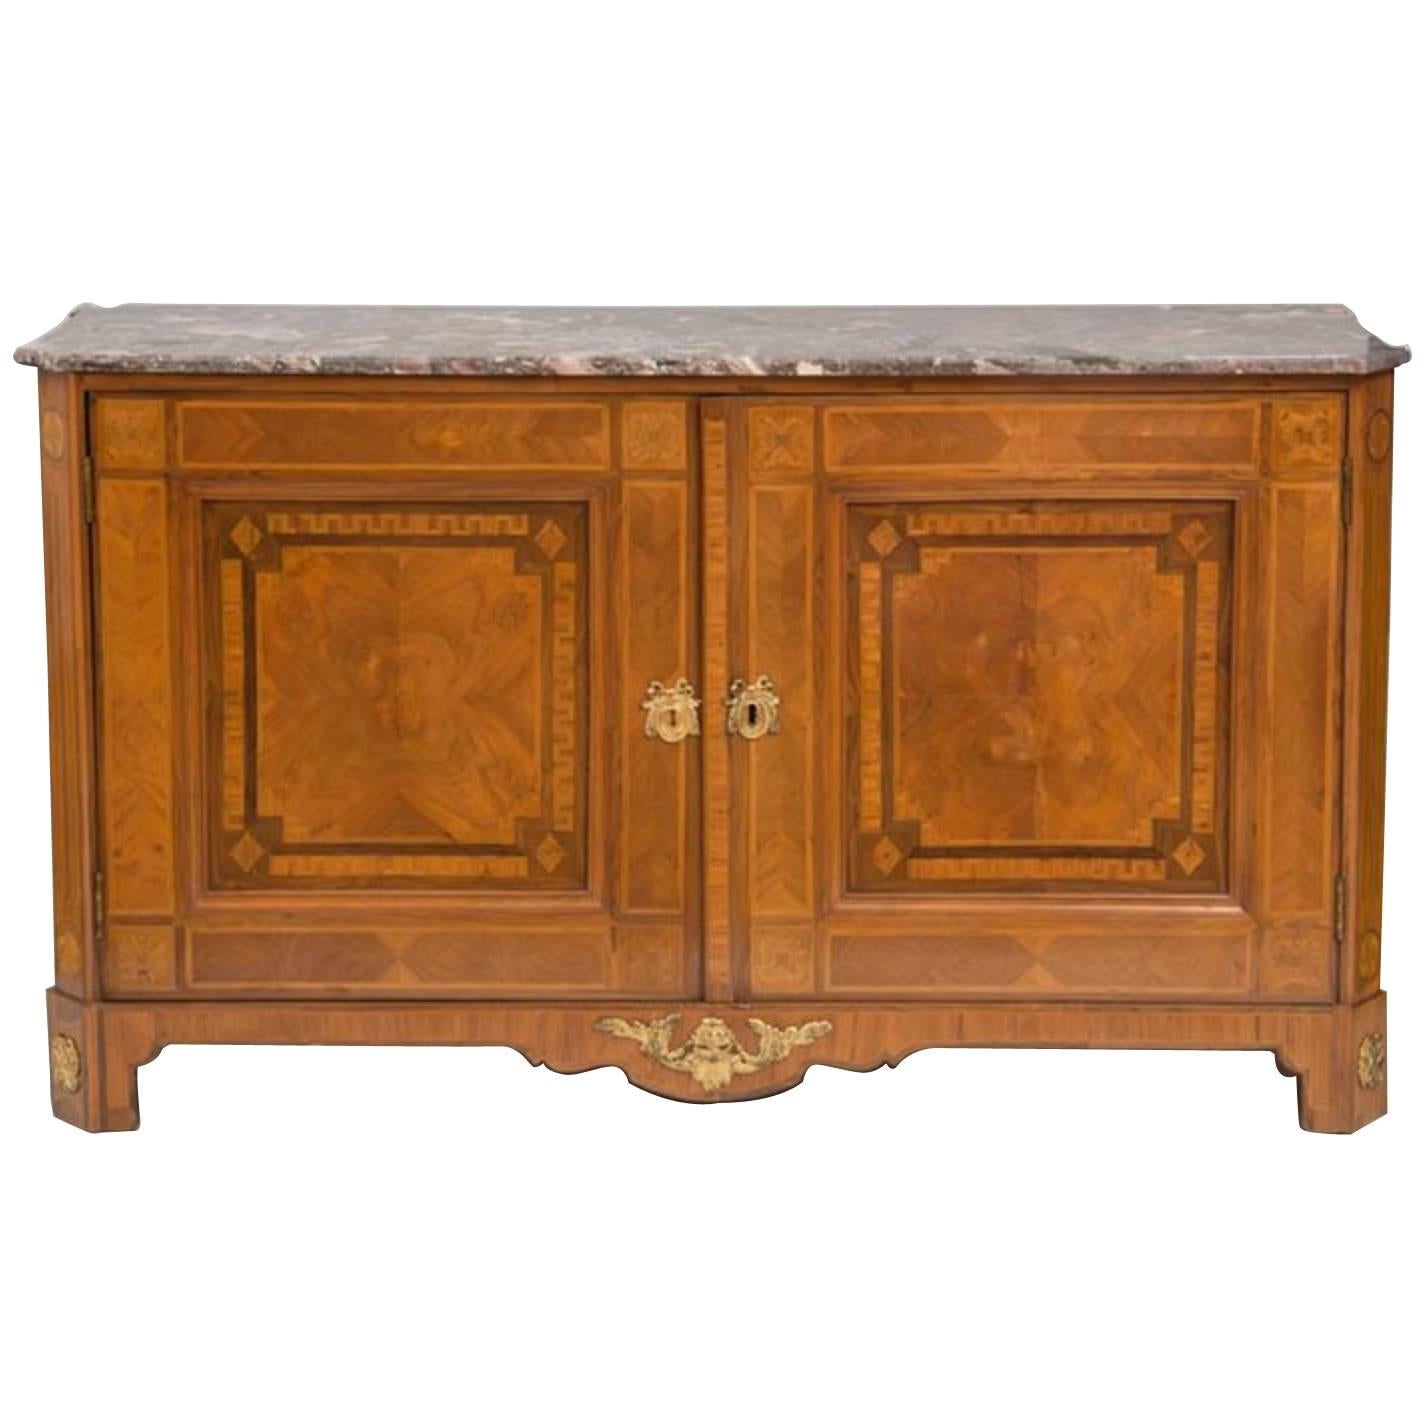 Fine Louis XVI Marquetry Inlaid Bronze Mounted Marble-Top Cabinet For Sale